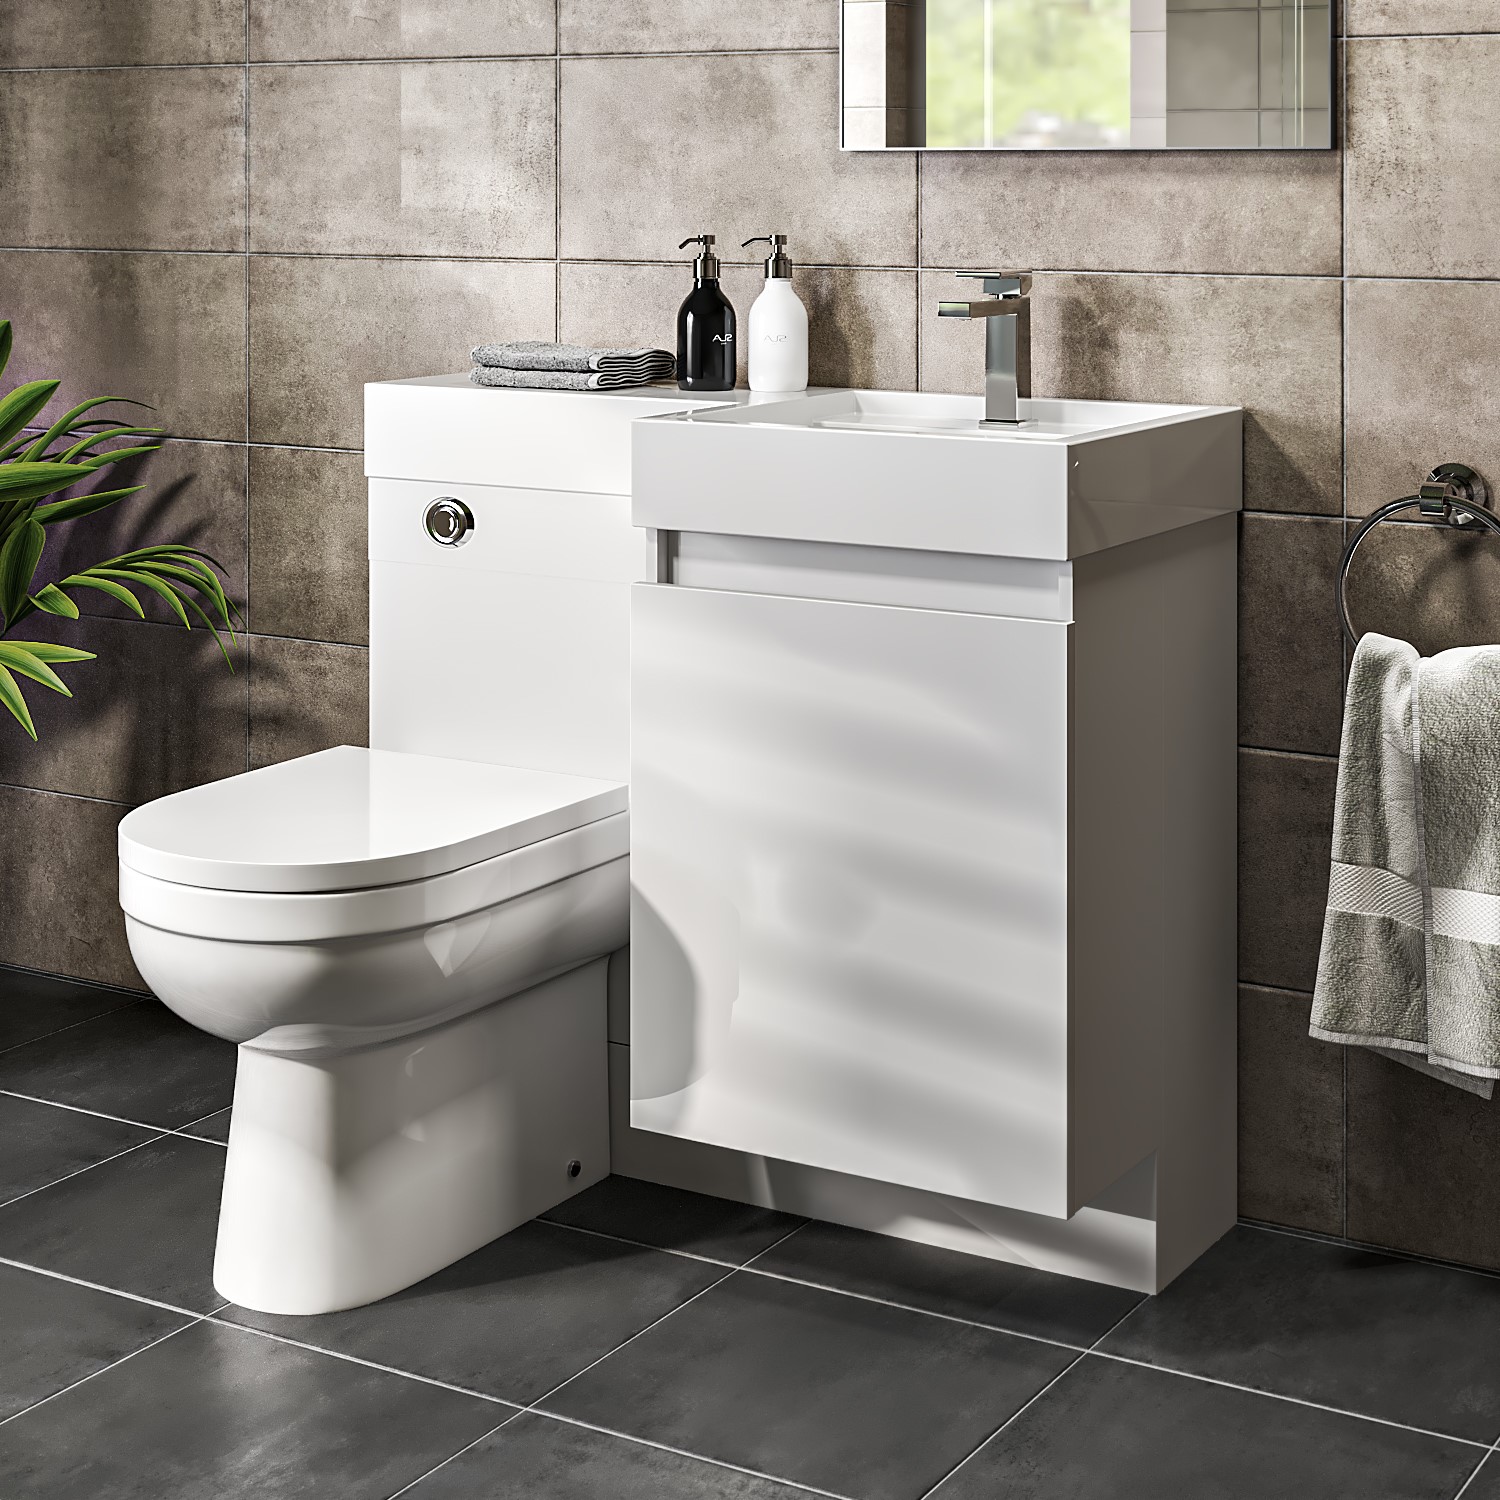 900mm White Toilet and Sink Unit Right Hand with Round Toilet - Agora